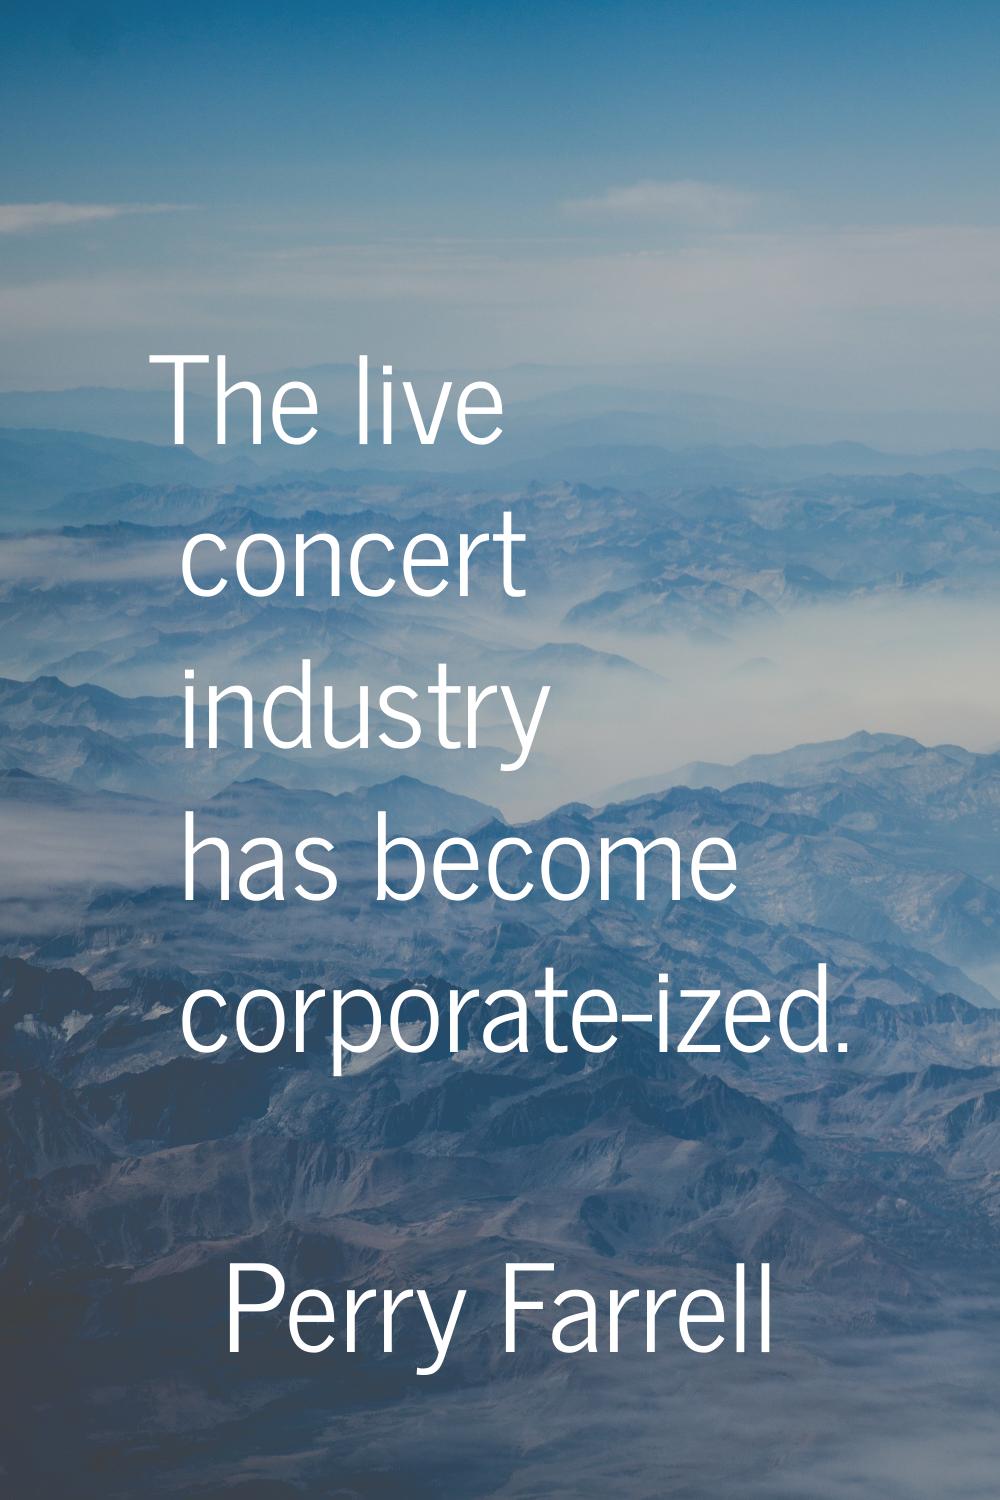 The live concert industry has become corporate-ized.